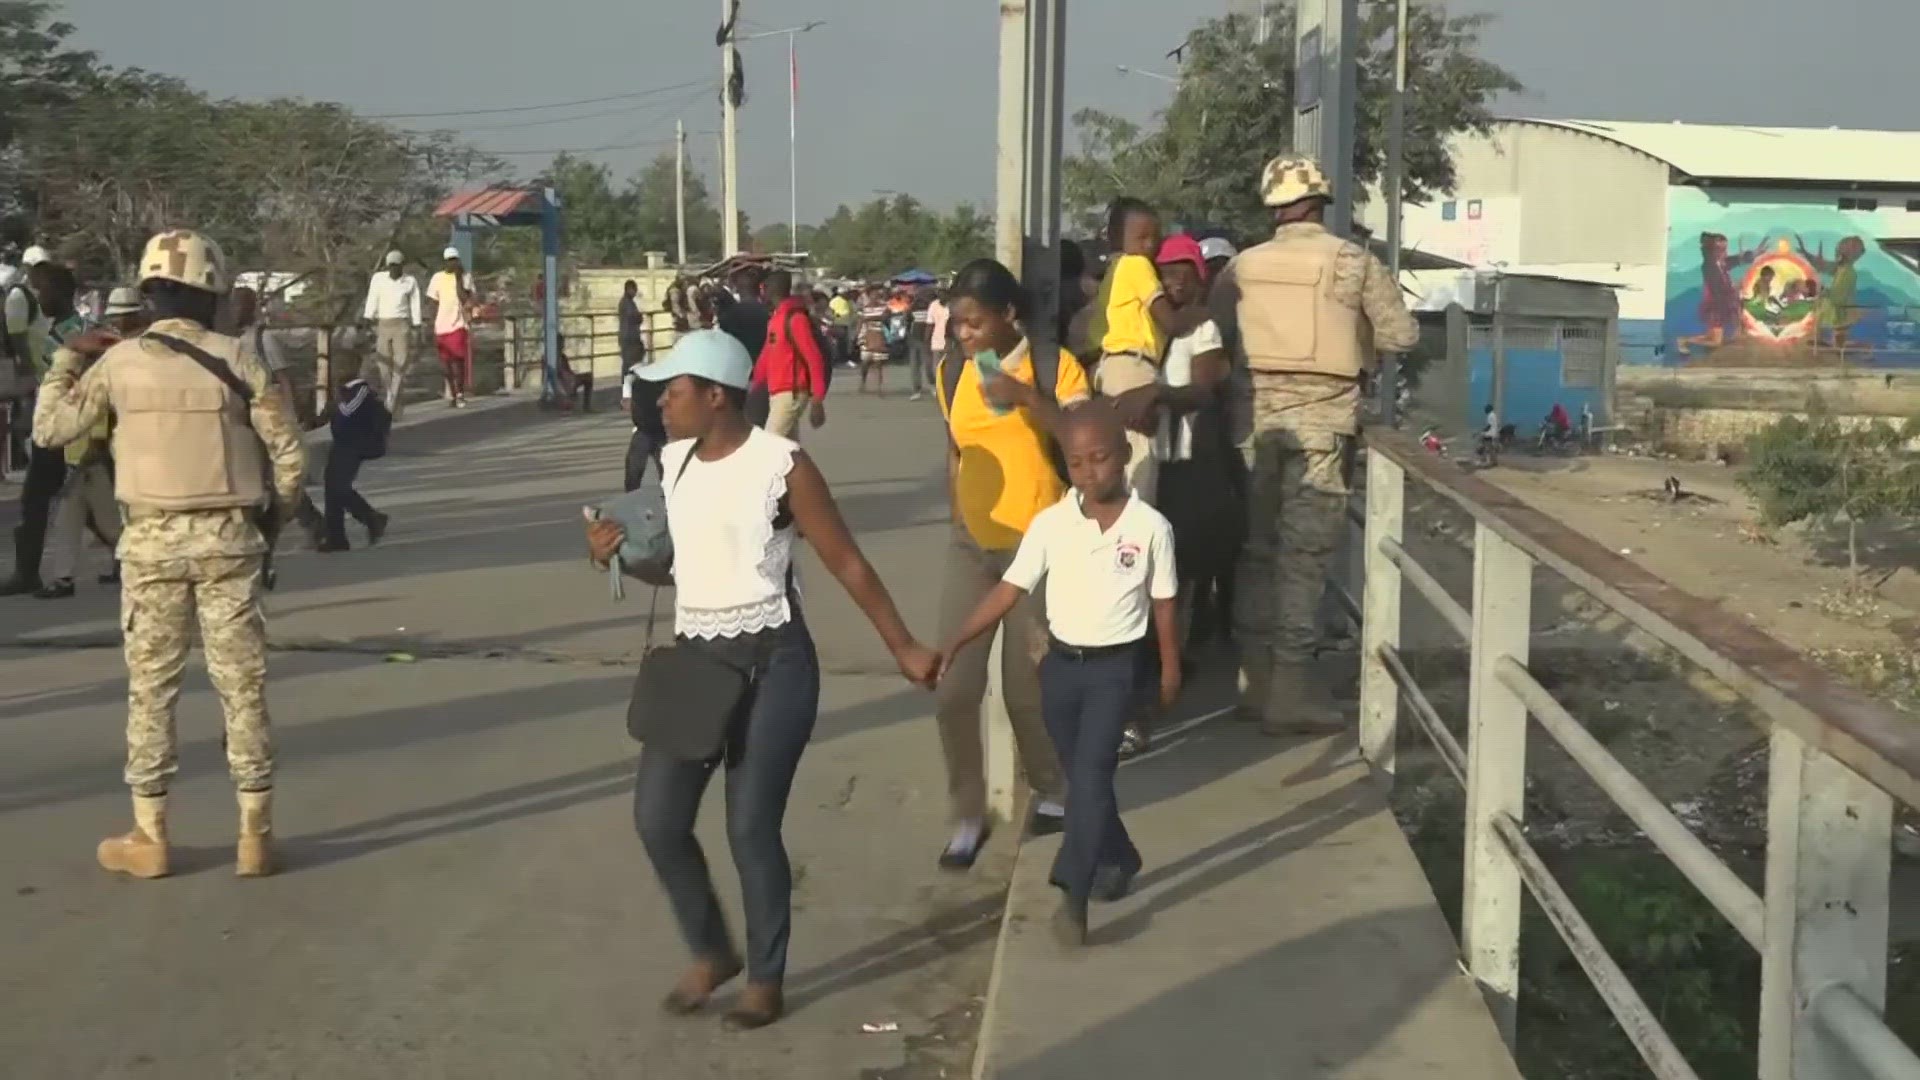 Violence broke out in Haiti after the current prime minister announced his resignation. Americans in Haiti have been trapped since the shutdown.